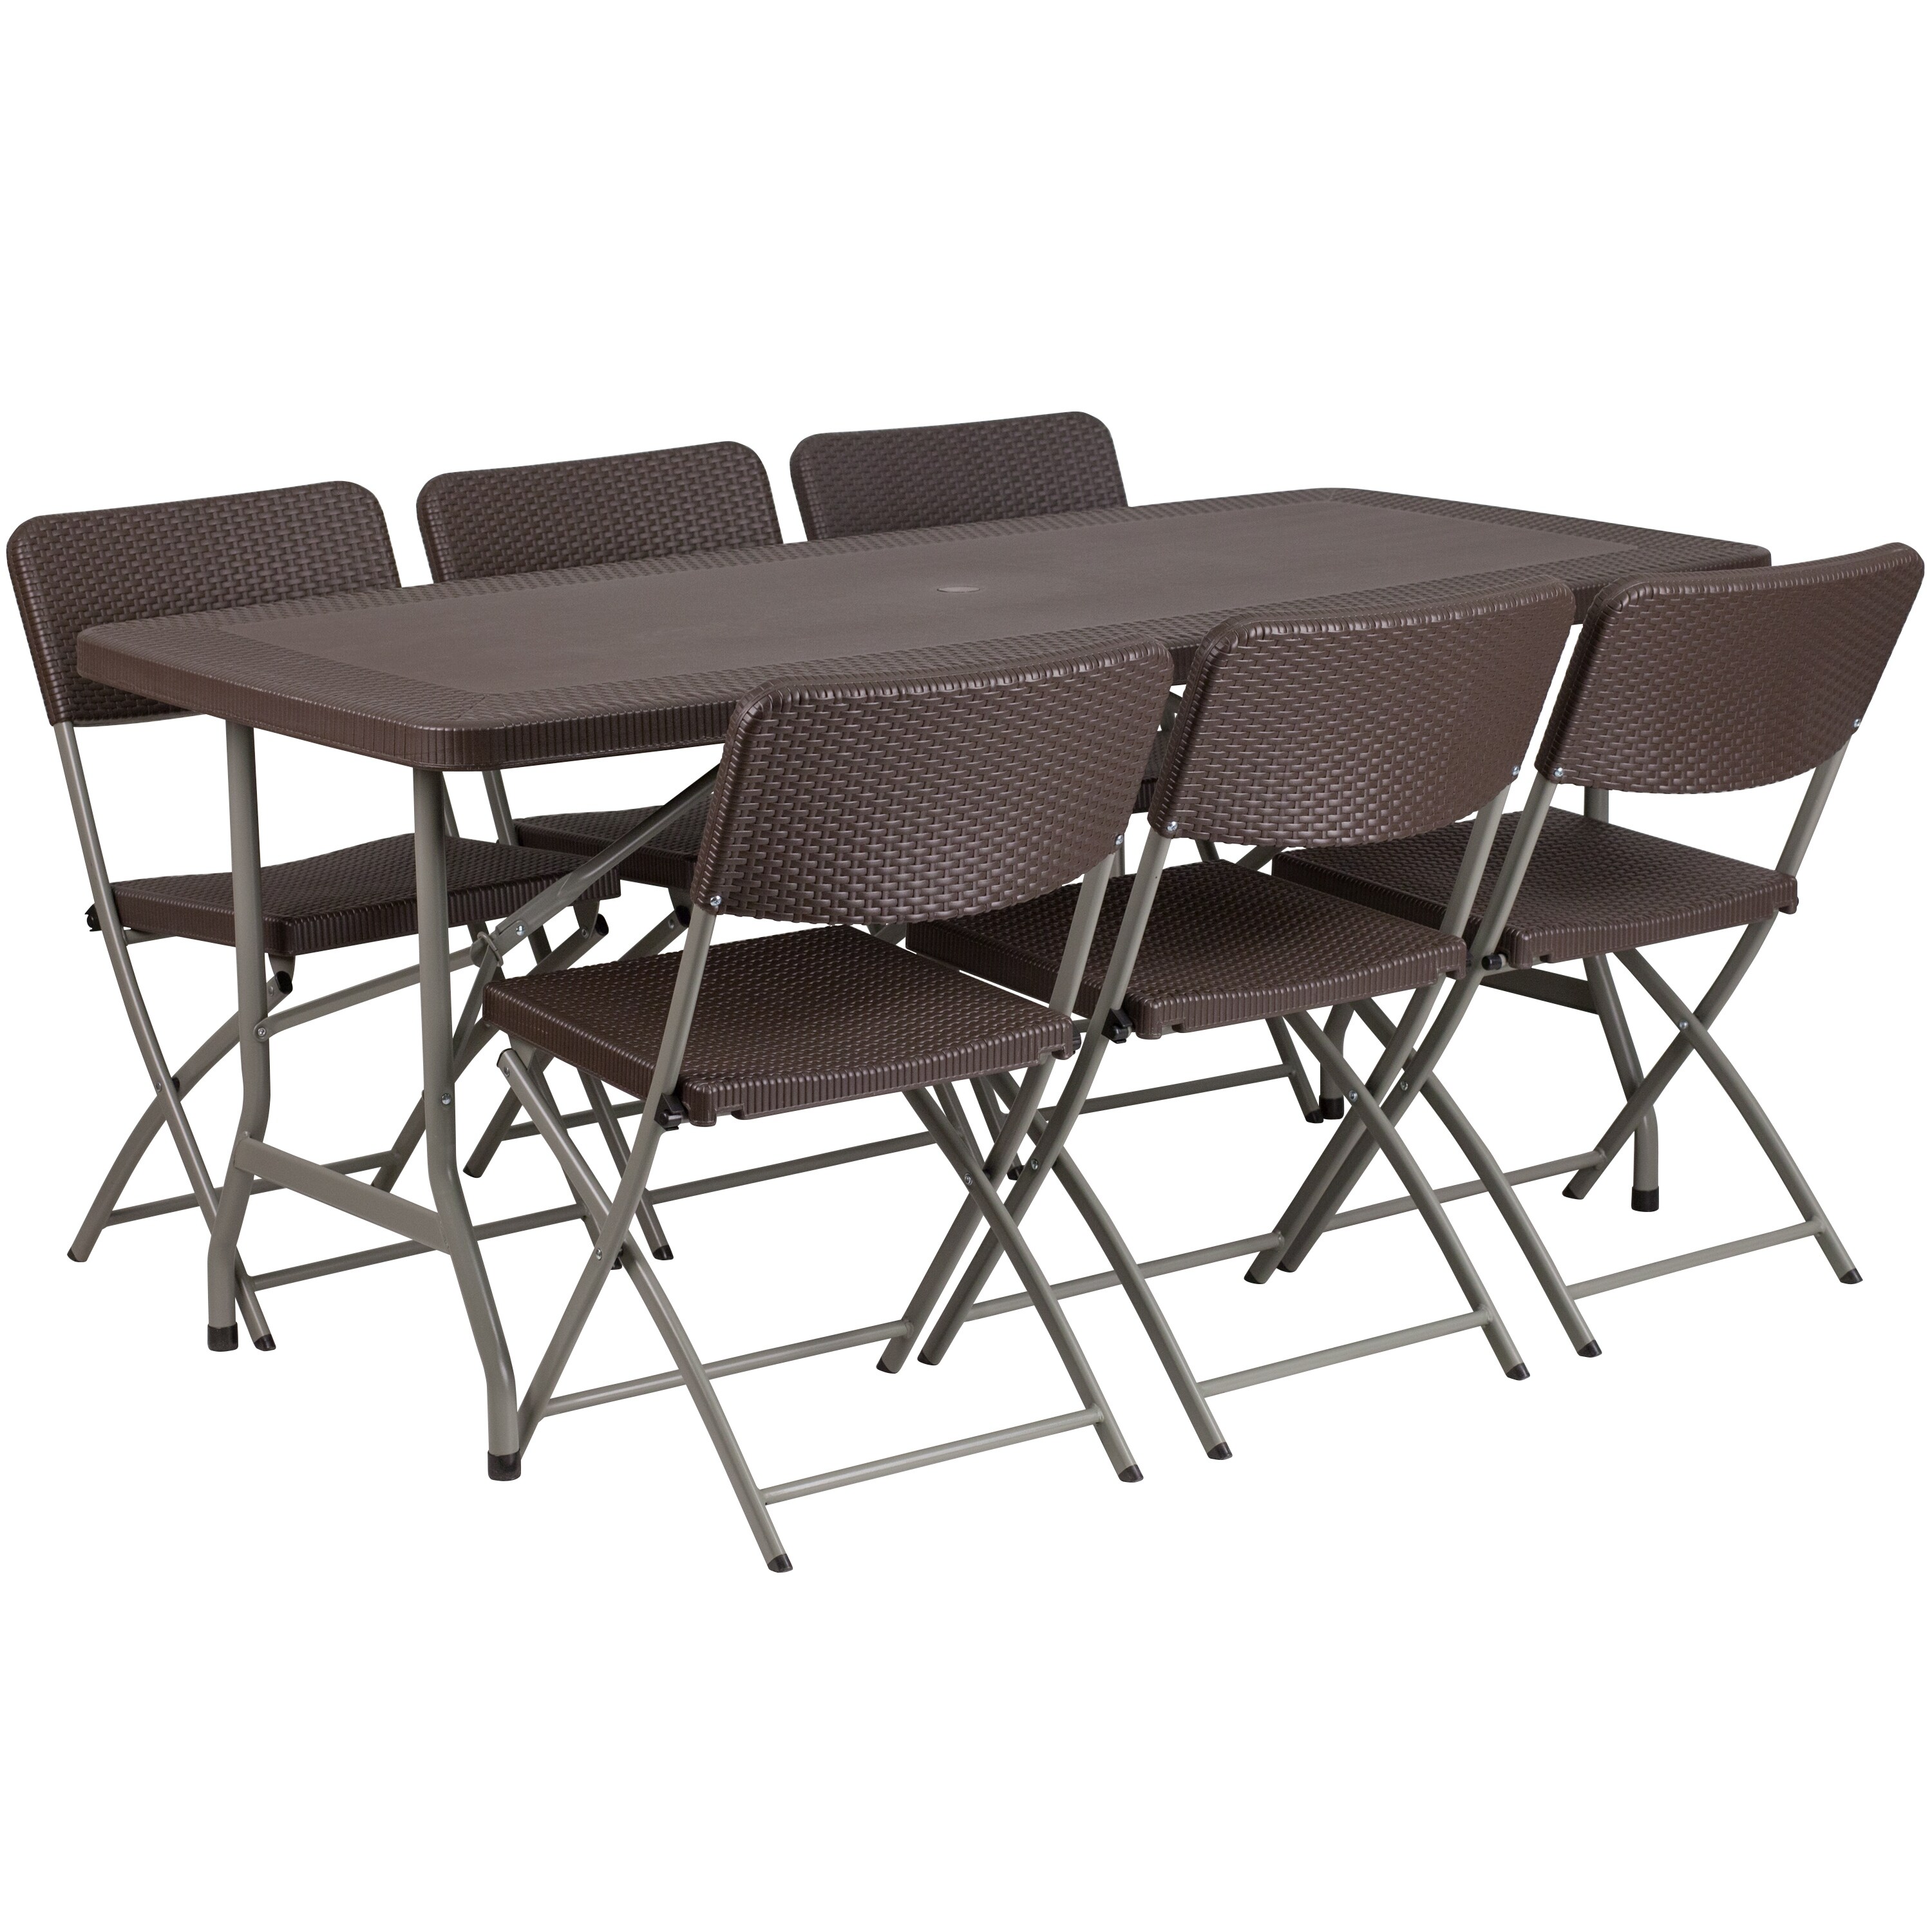 folding table with 6 chairs